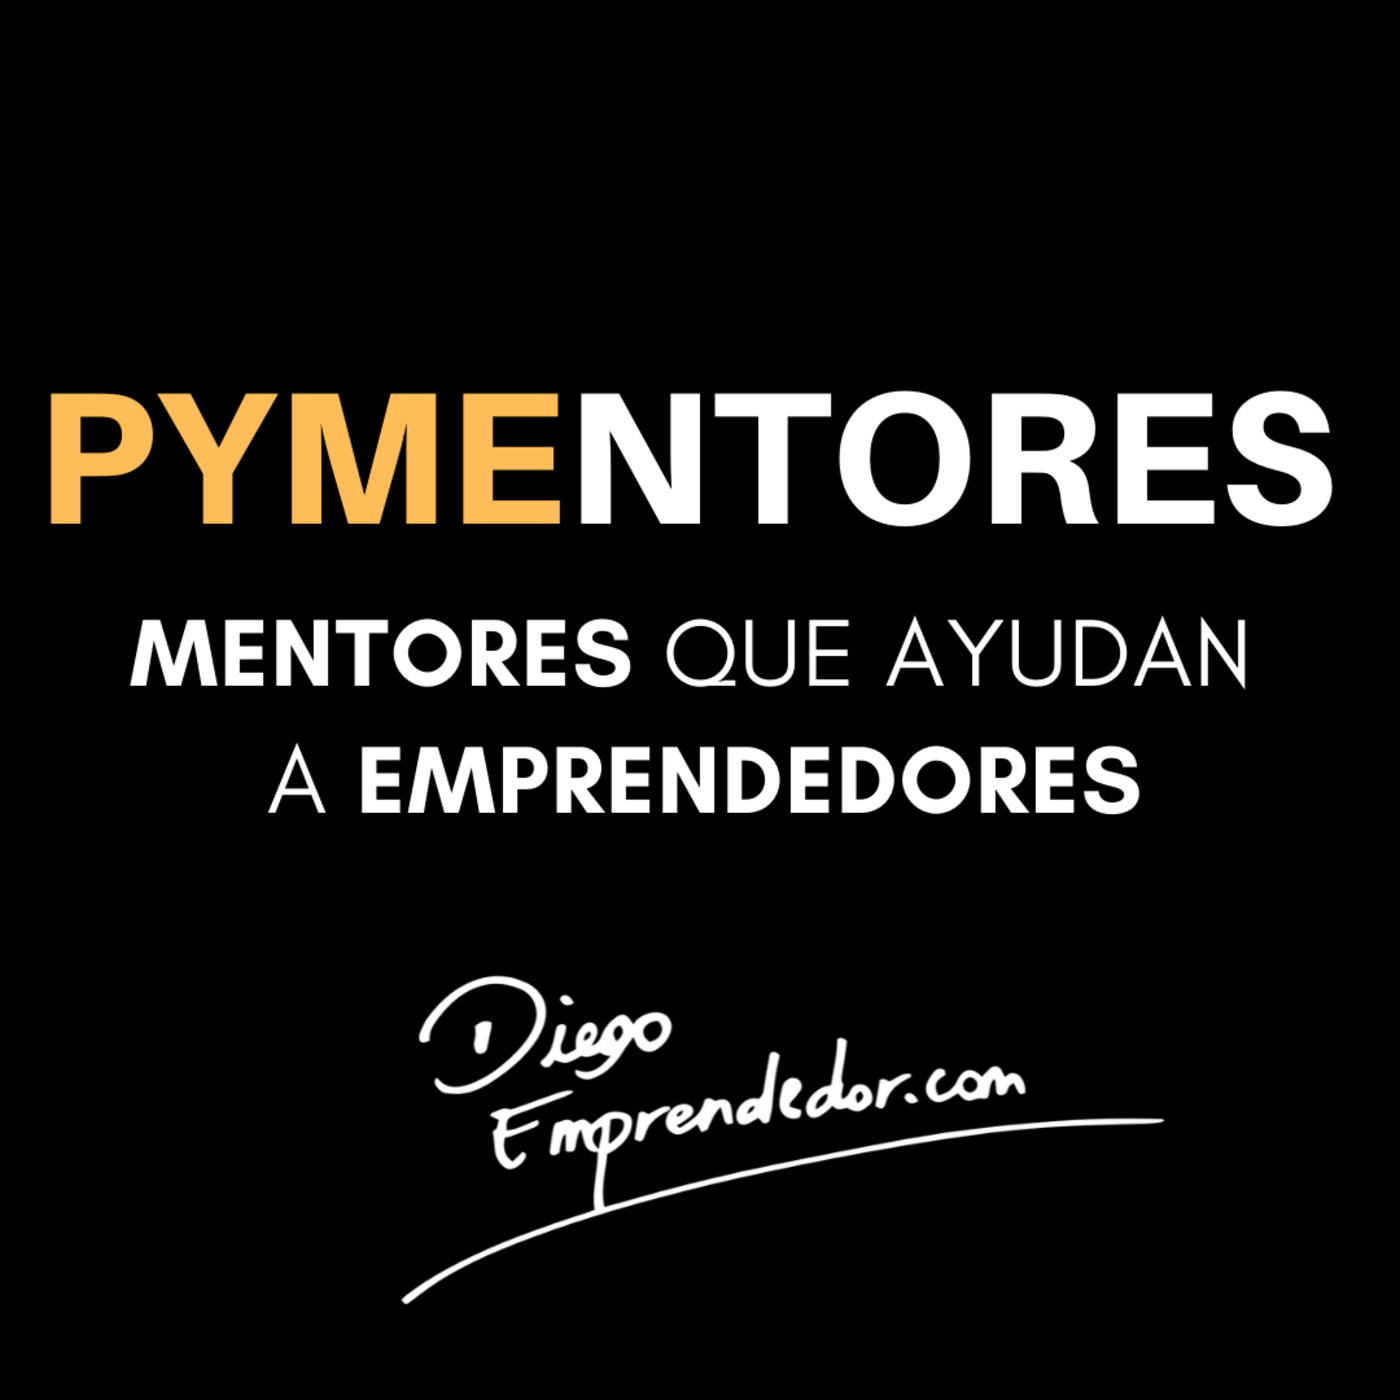 Pymentores